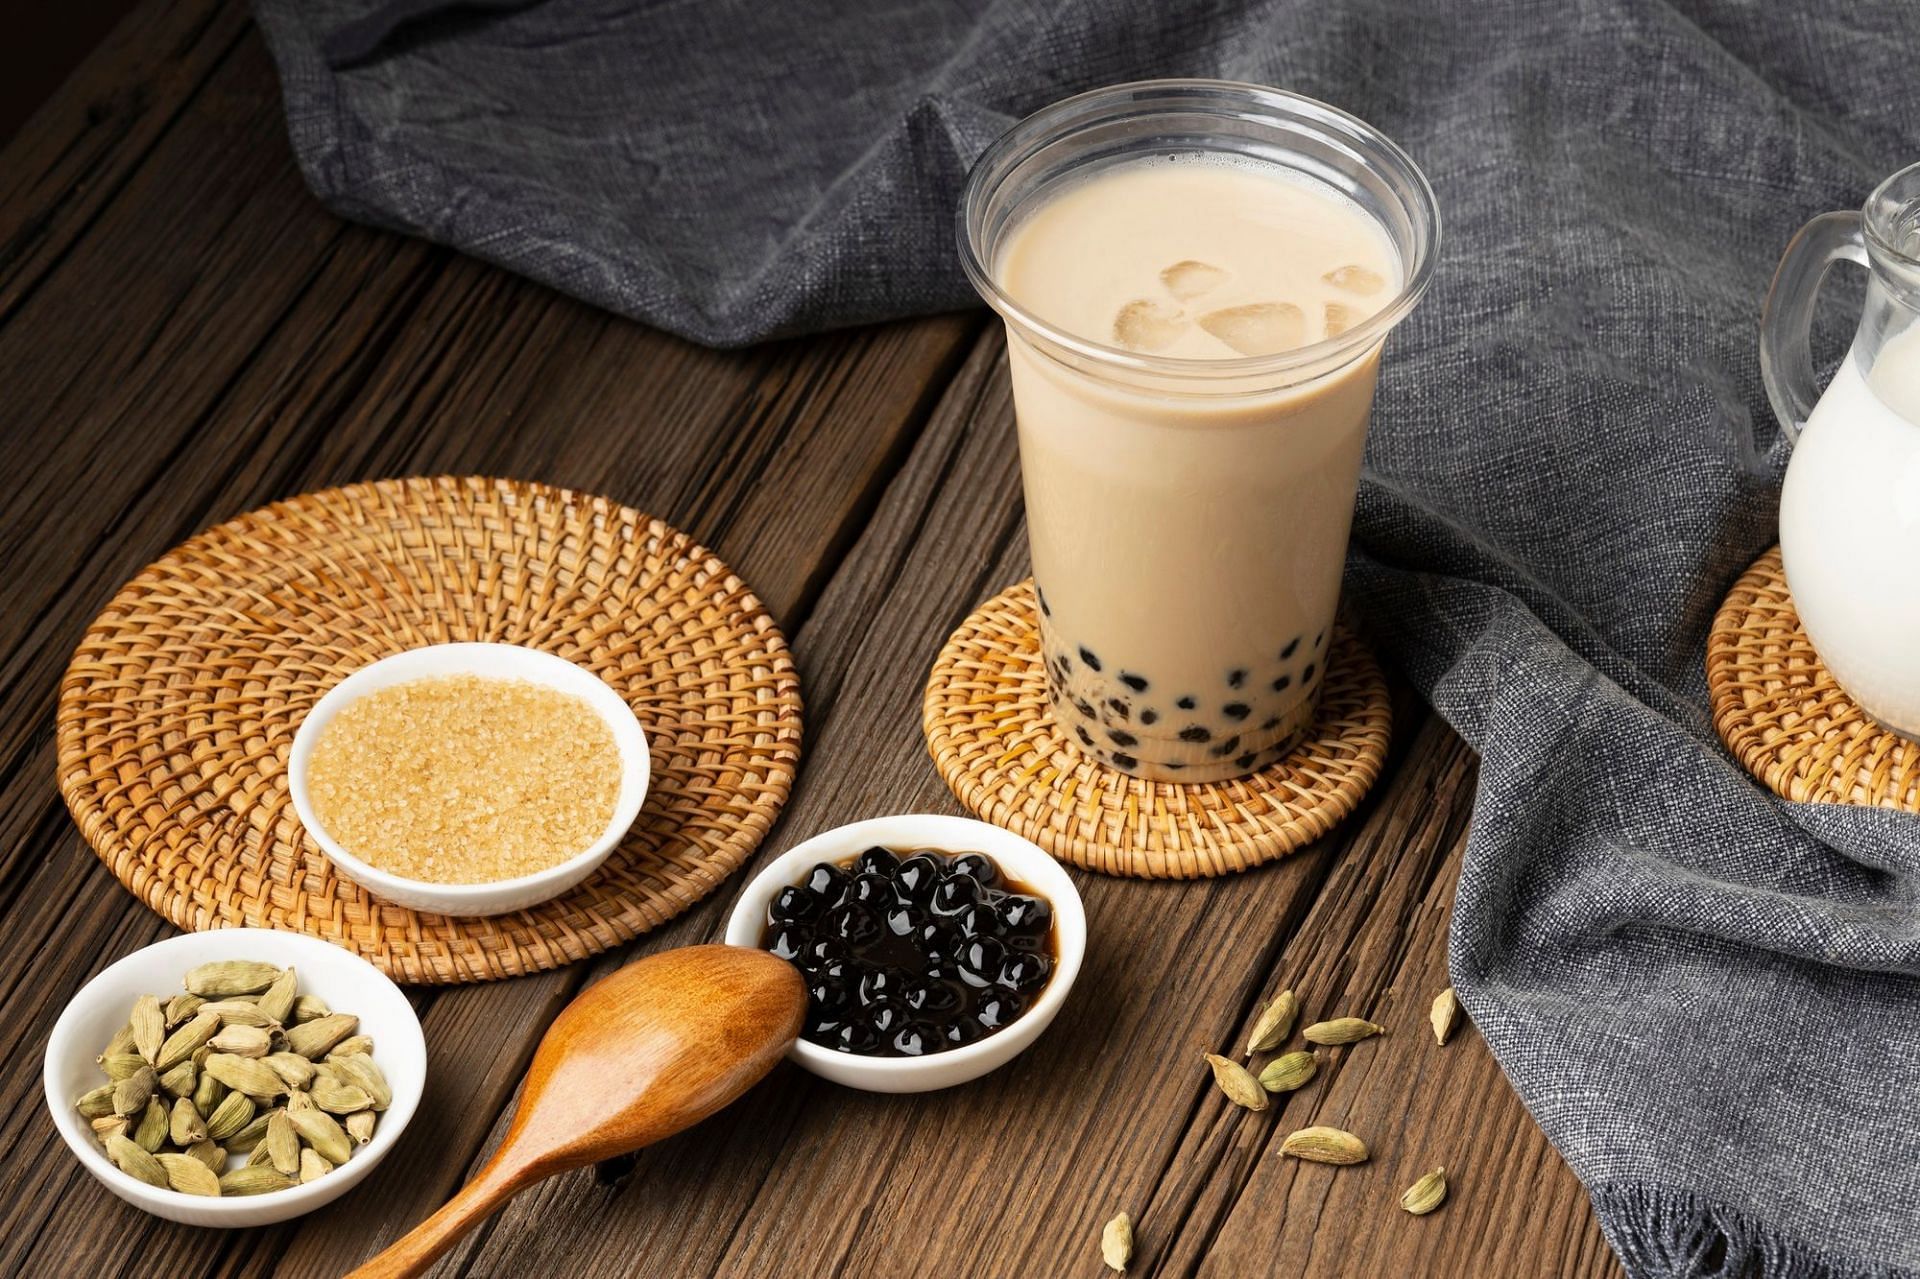 Boba Tea: Is it Healthy for you? - Boba Nutrition